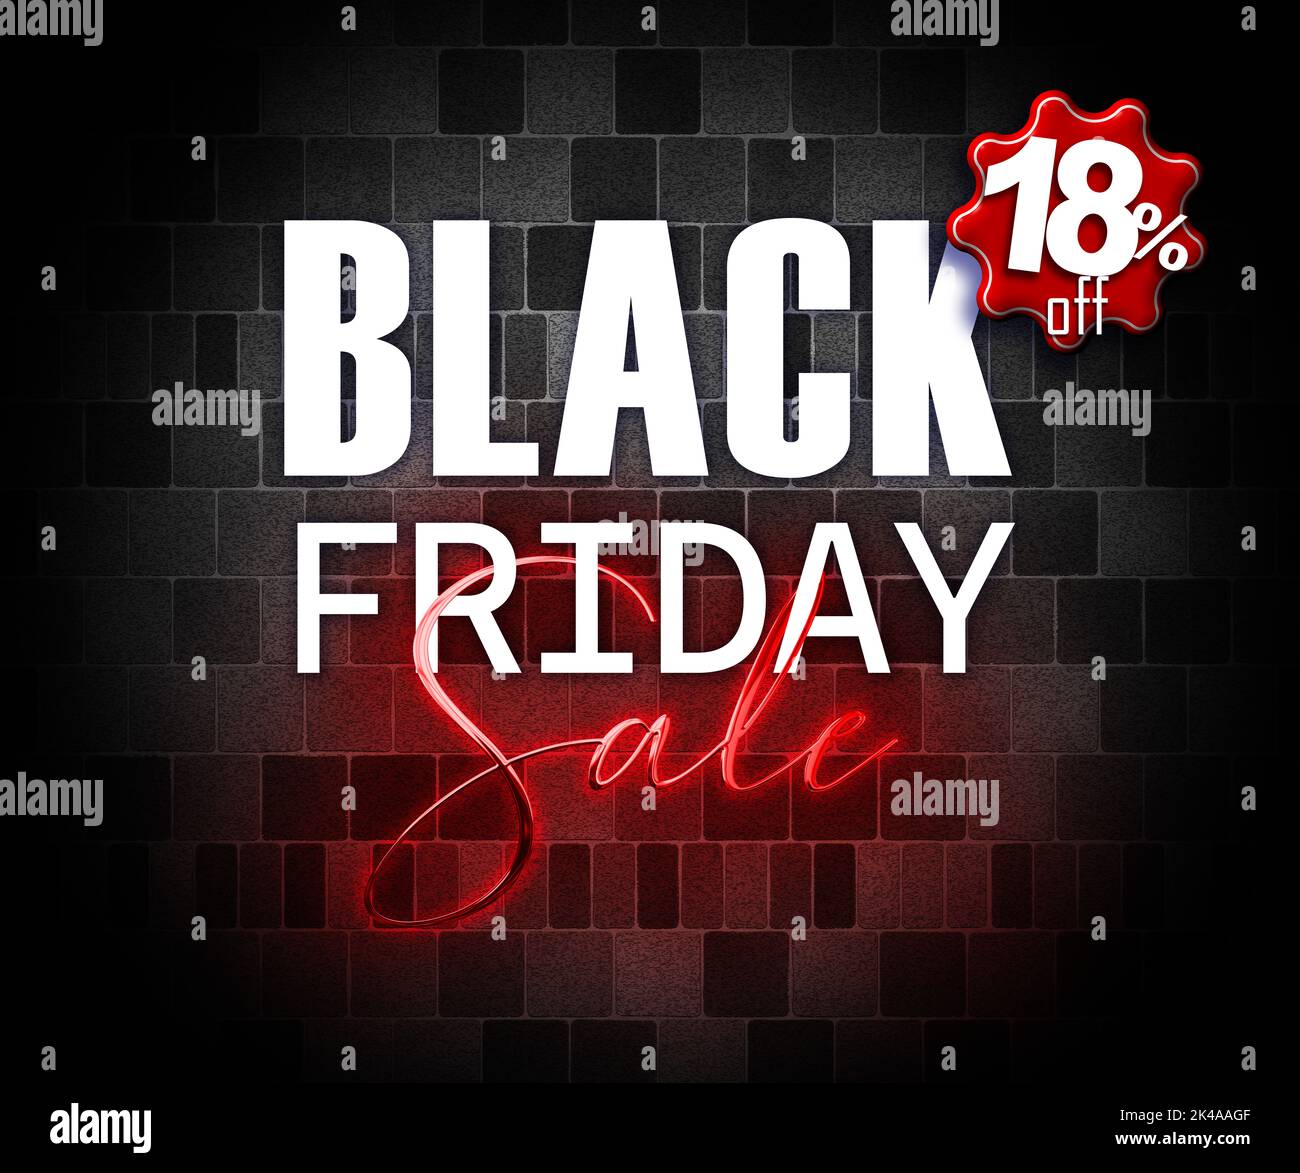 illustration with 3d elements black friday promotion banner 18 percent off sales increase Stock Photo